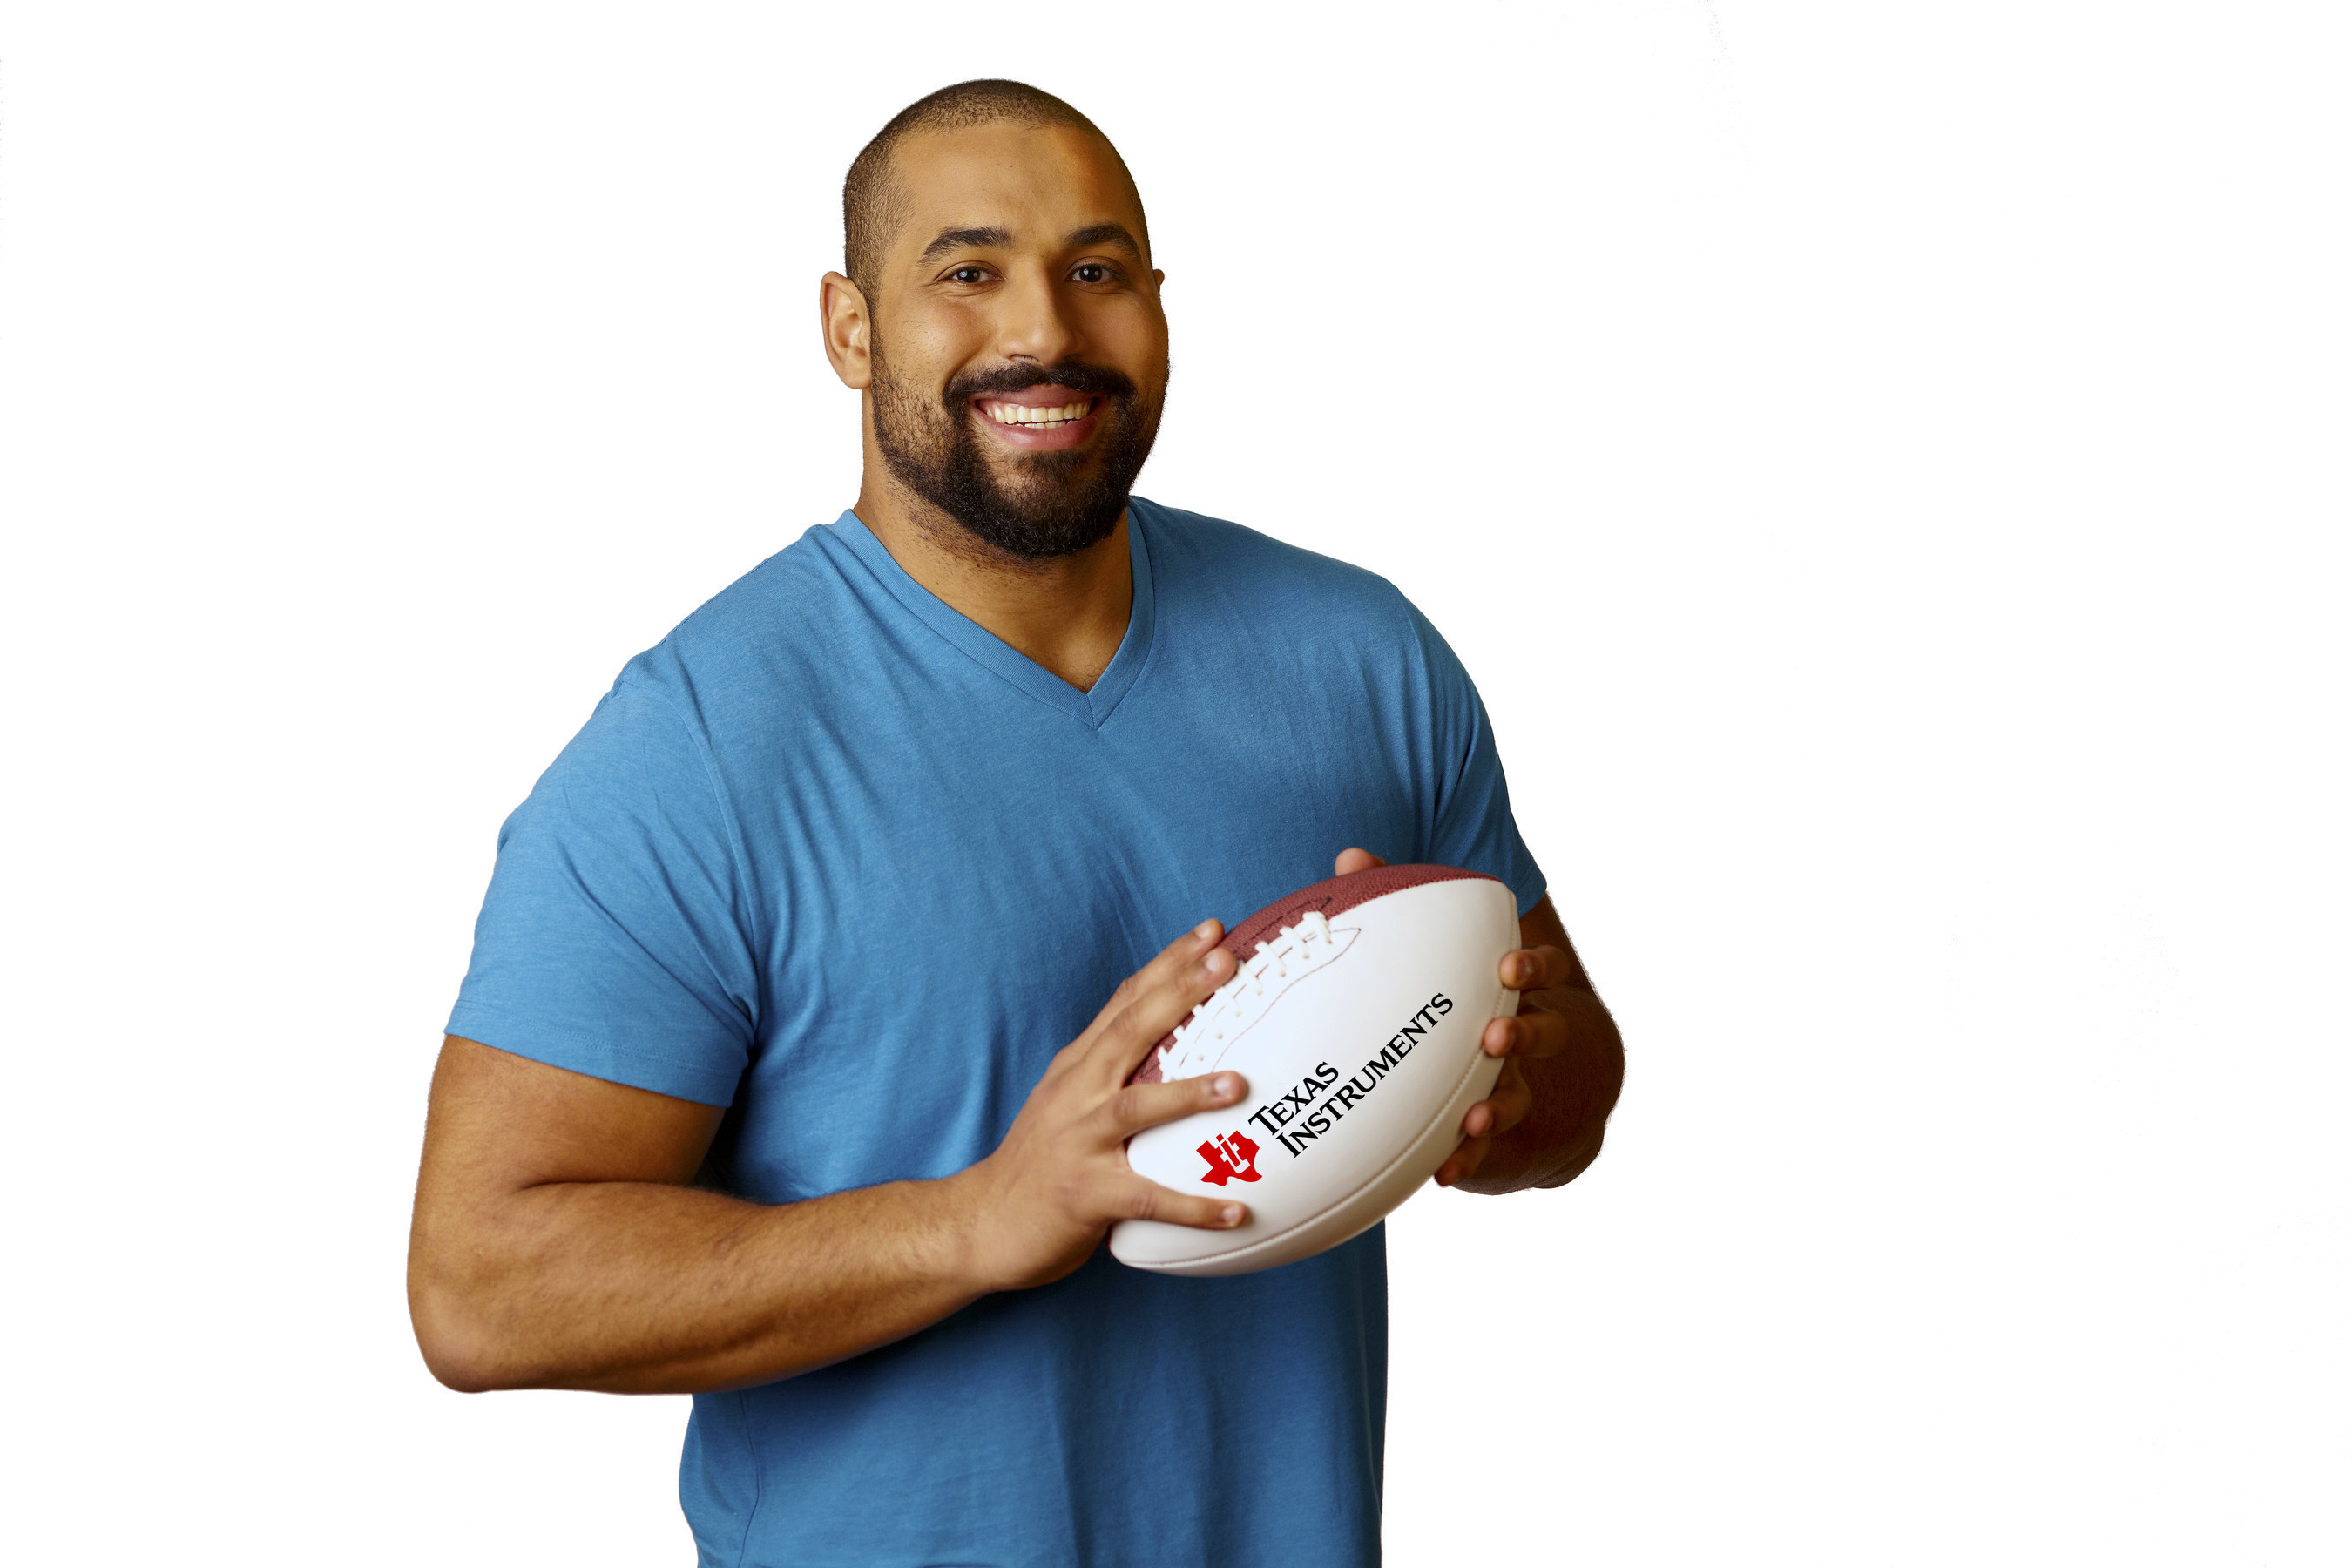 Baltimore Ravens Offensive Lineman and published mathematician, John Urschel, is teaming up with Texas Instruments to explore the STEM behind sports.